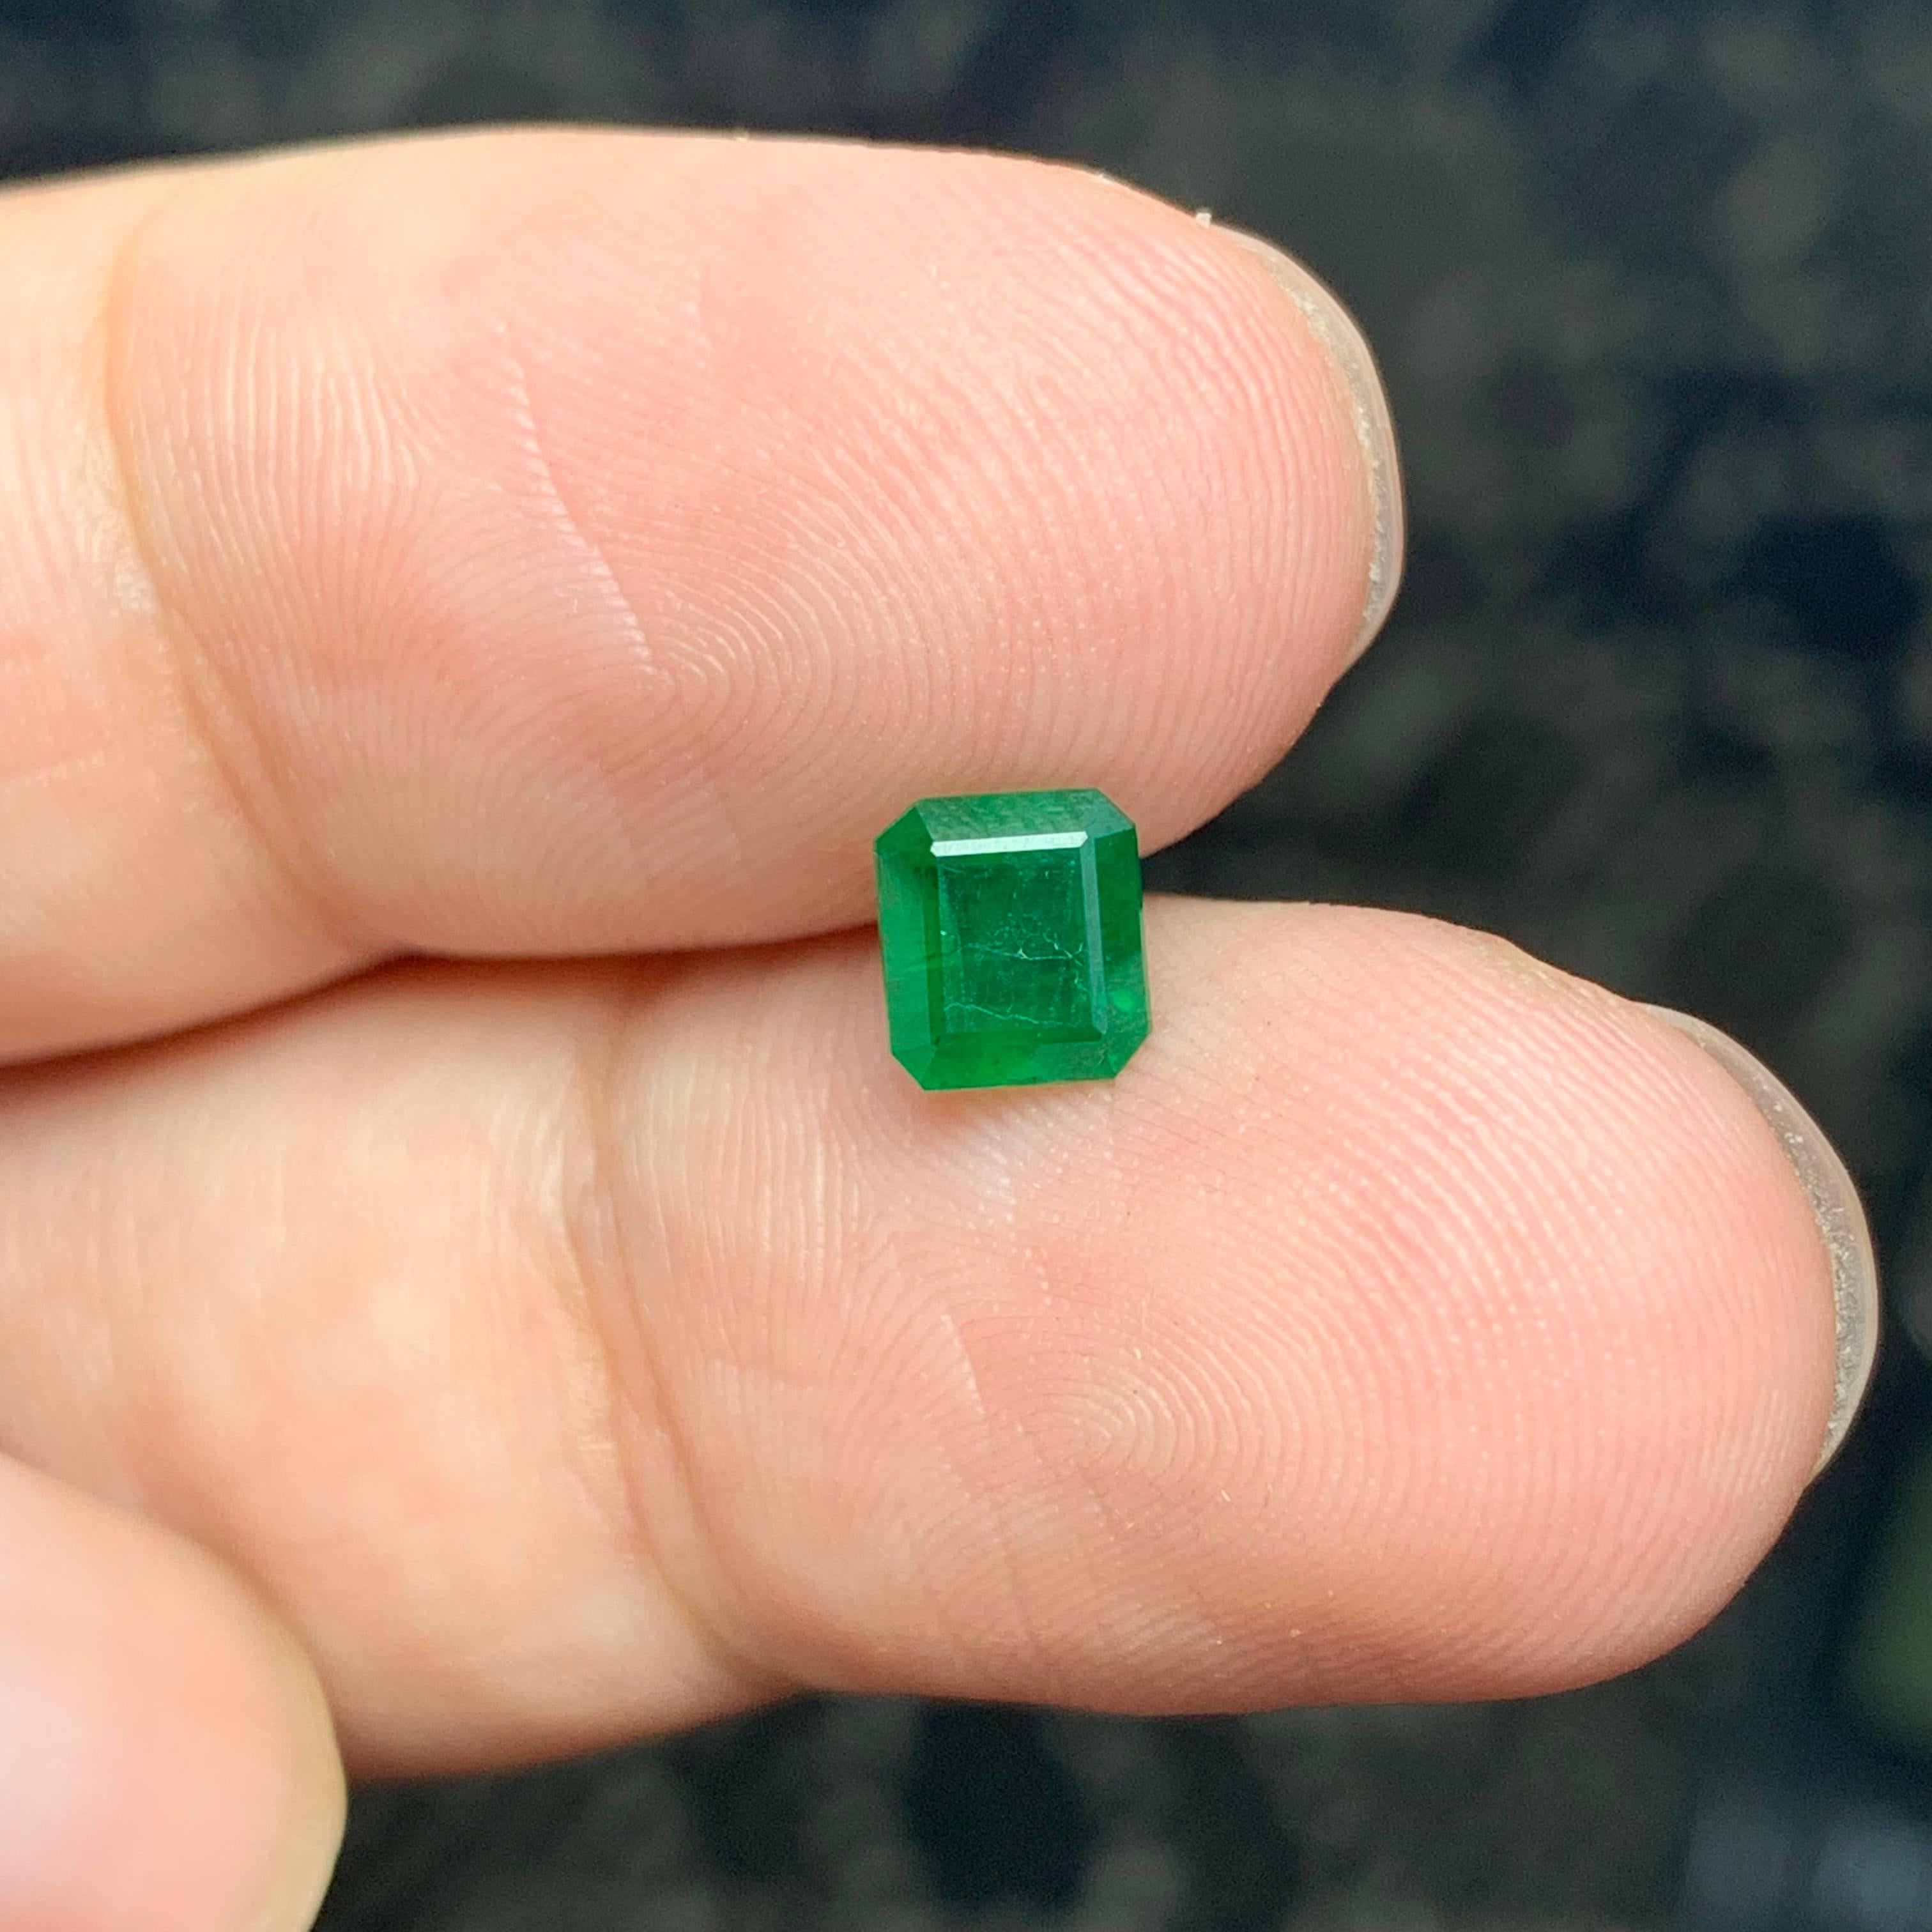 0.85 Carat Natural Loose Emerald Gemstone From Swat Mine, Pakistan  For Sale 1